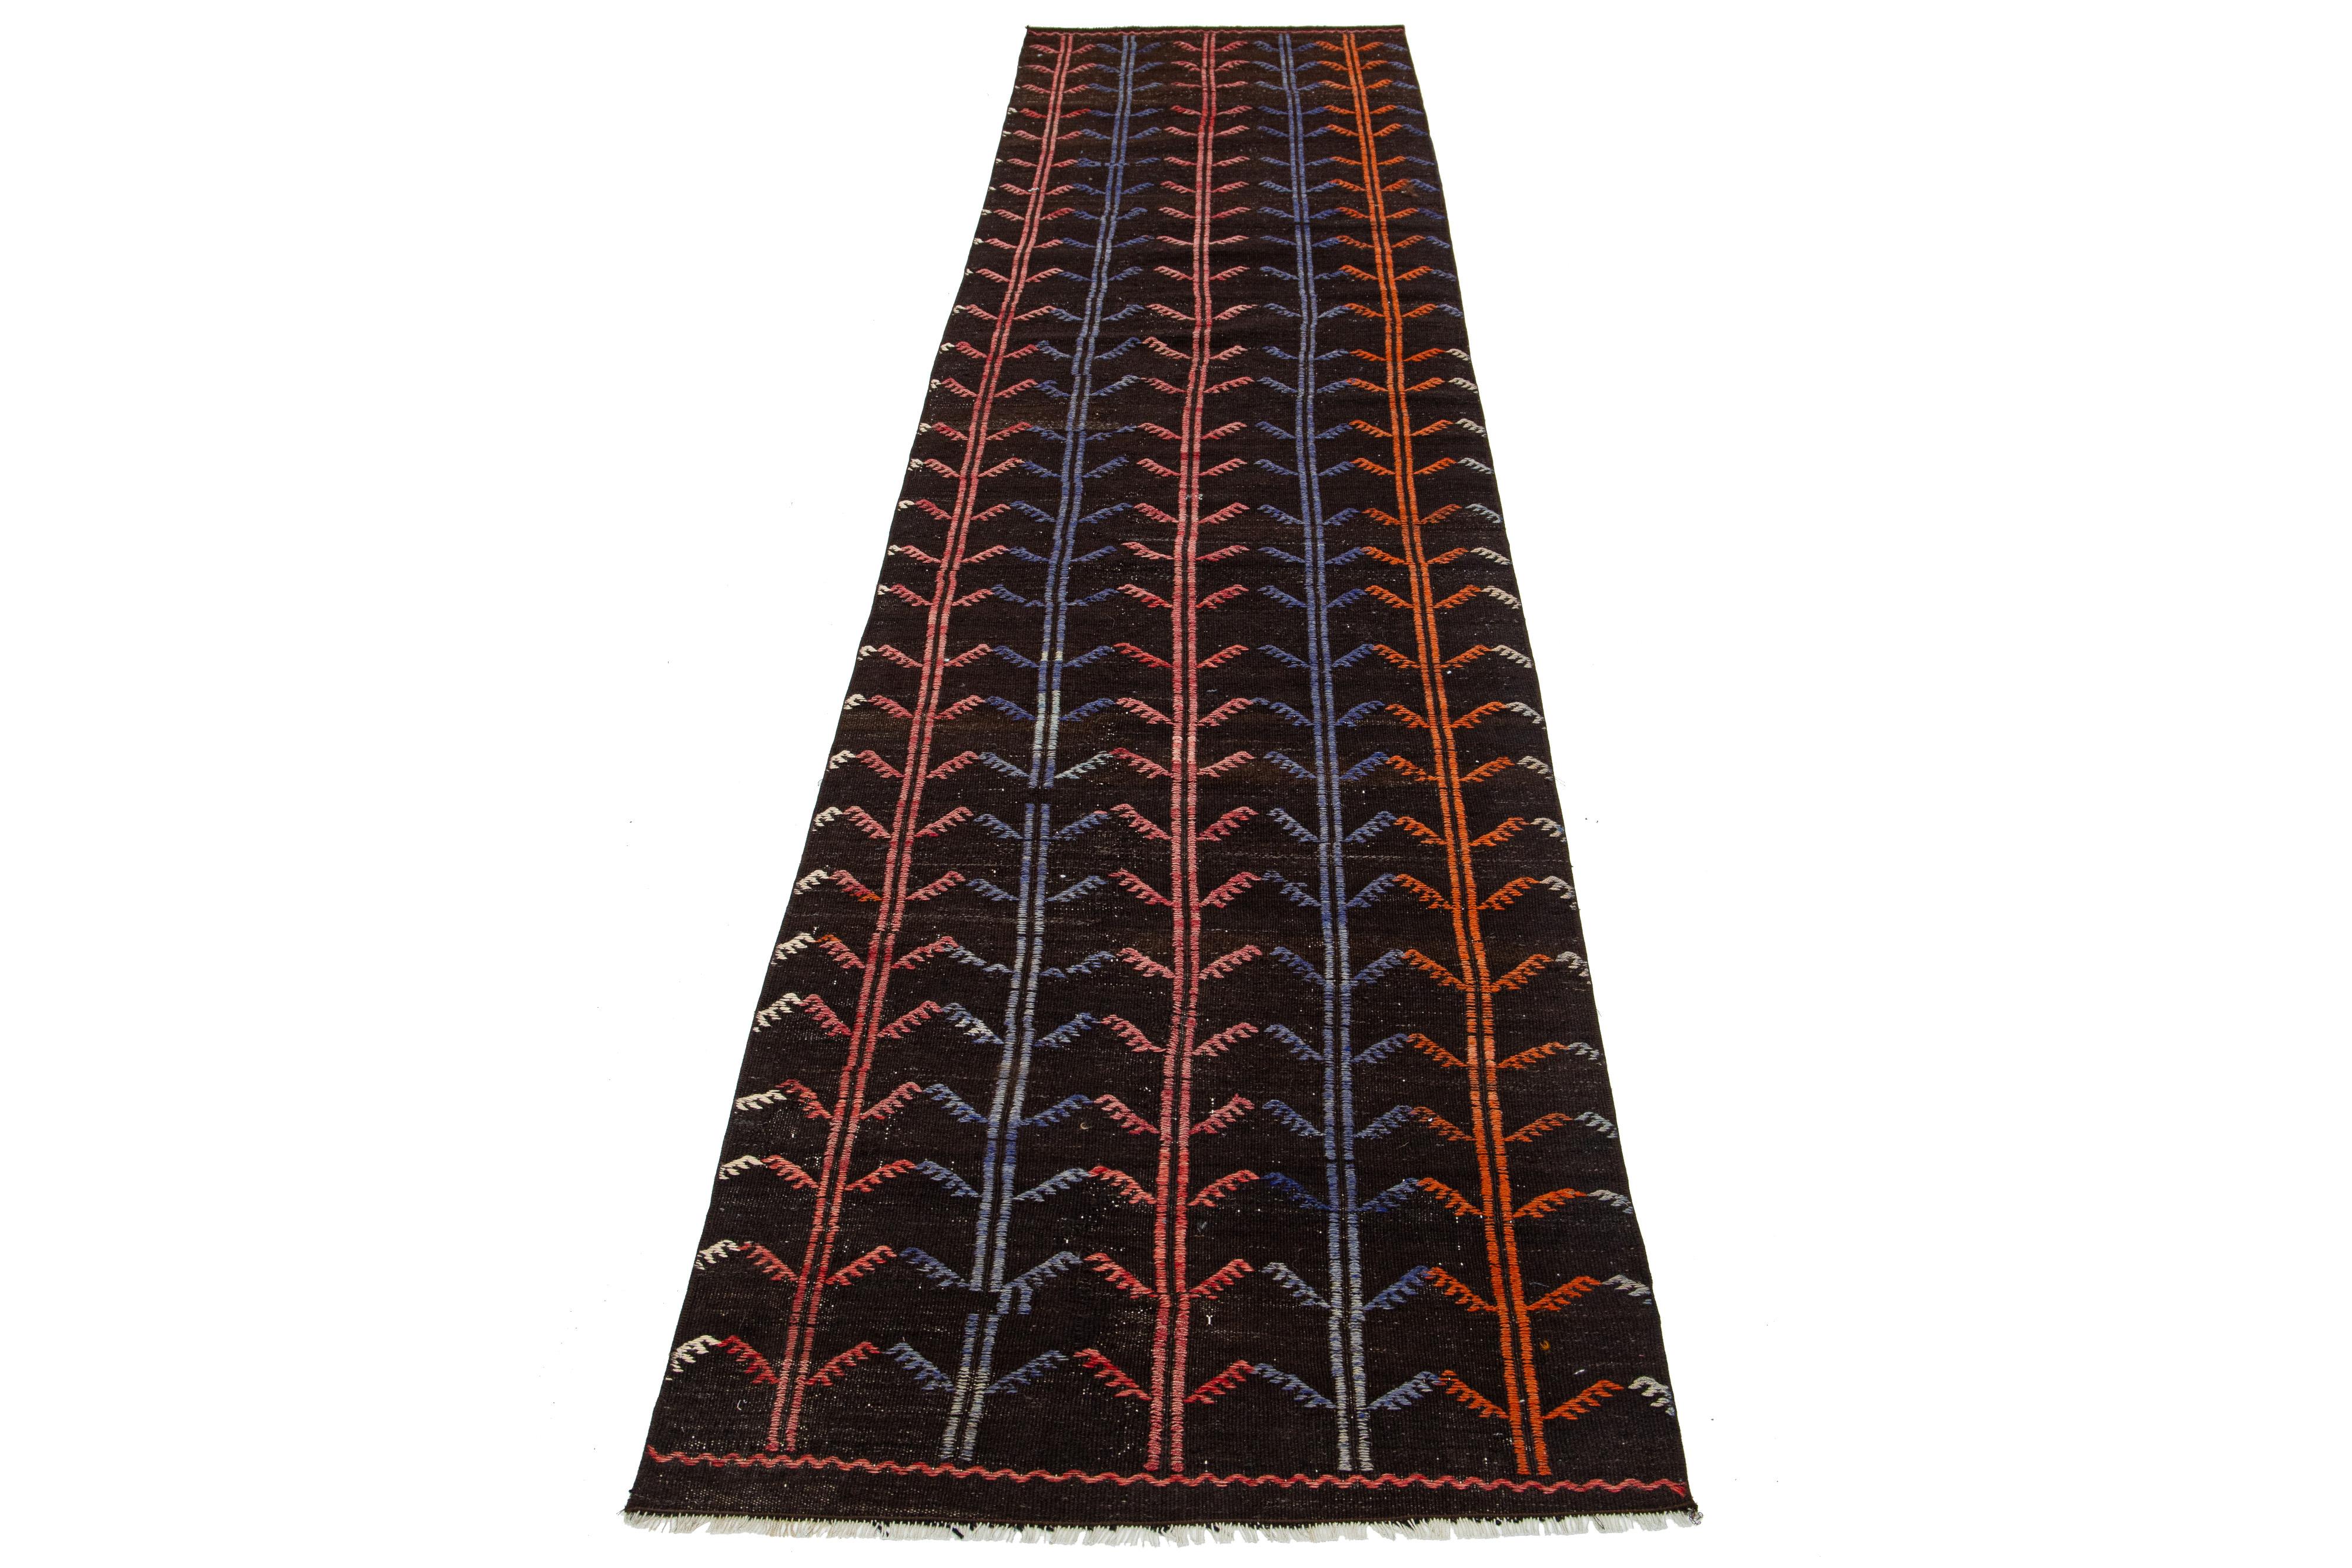 This beautiful wool kilim rug showcases a striking all-over geometric design with vibrant multi-colored accents set against a deep brown background.

This rug measures 2'10